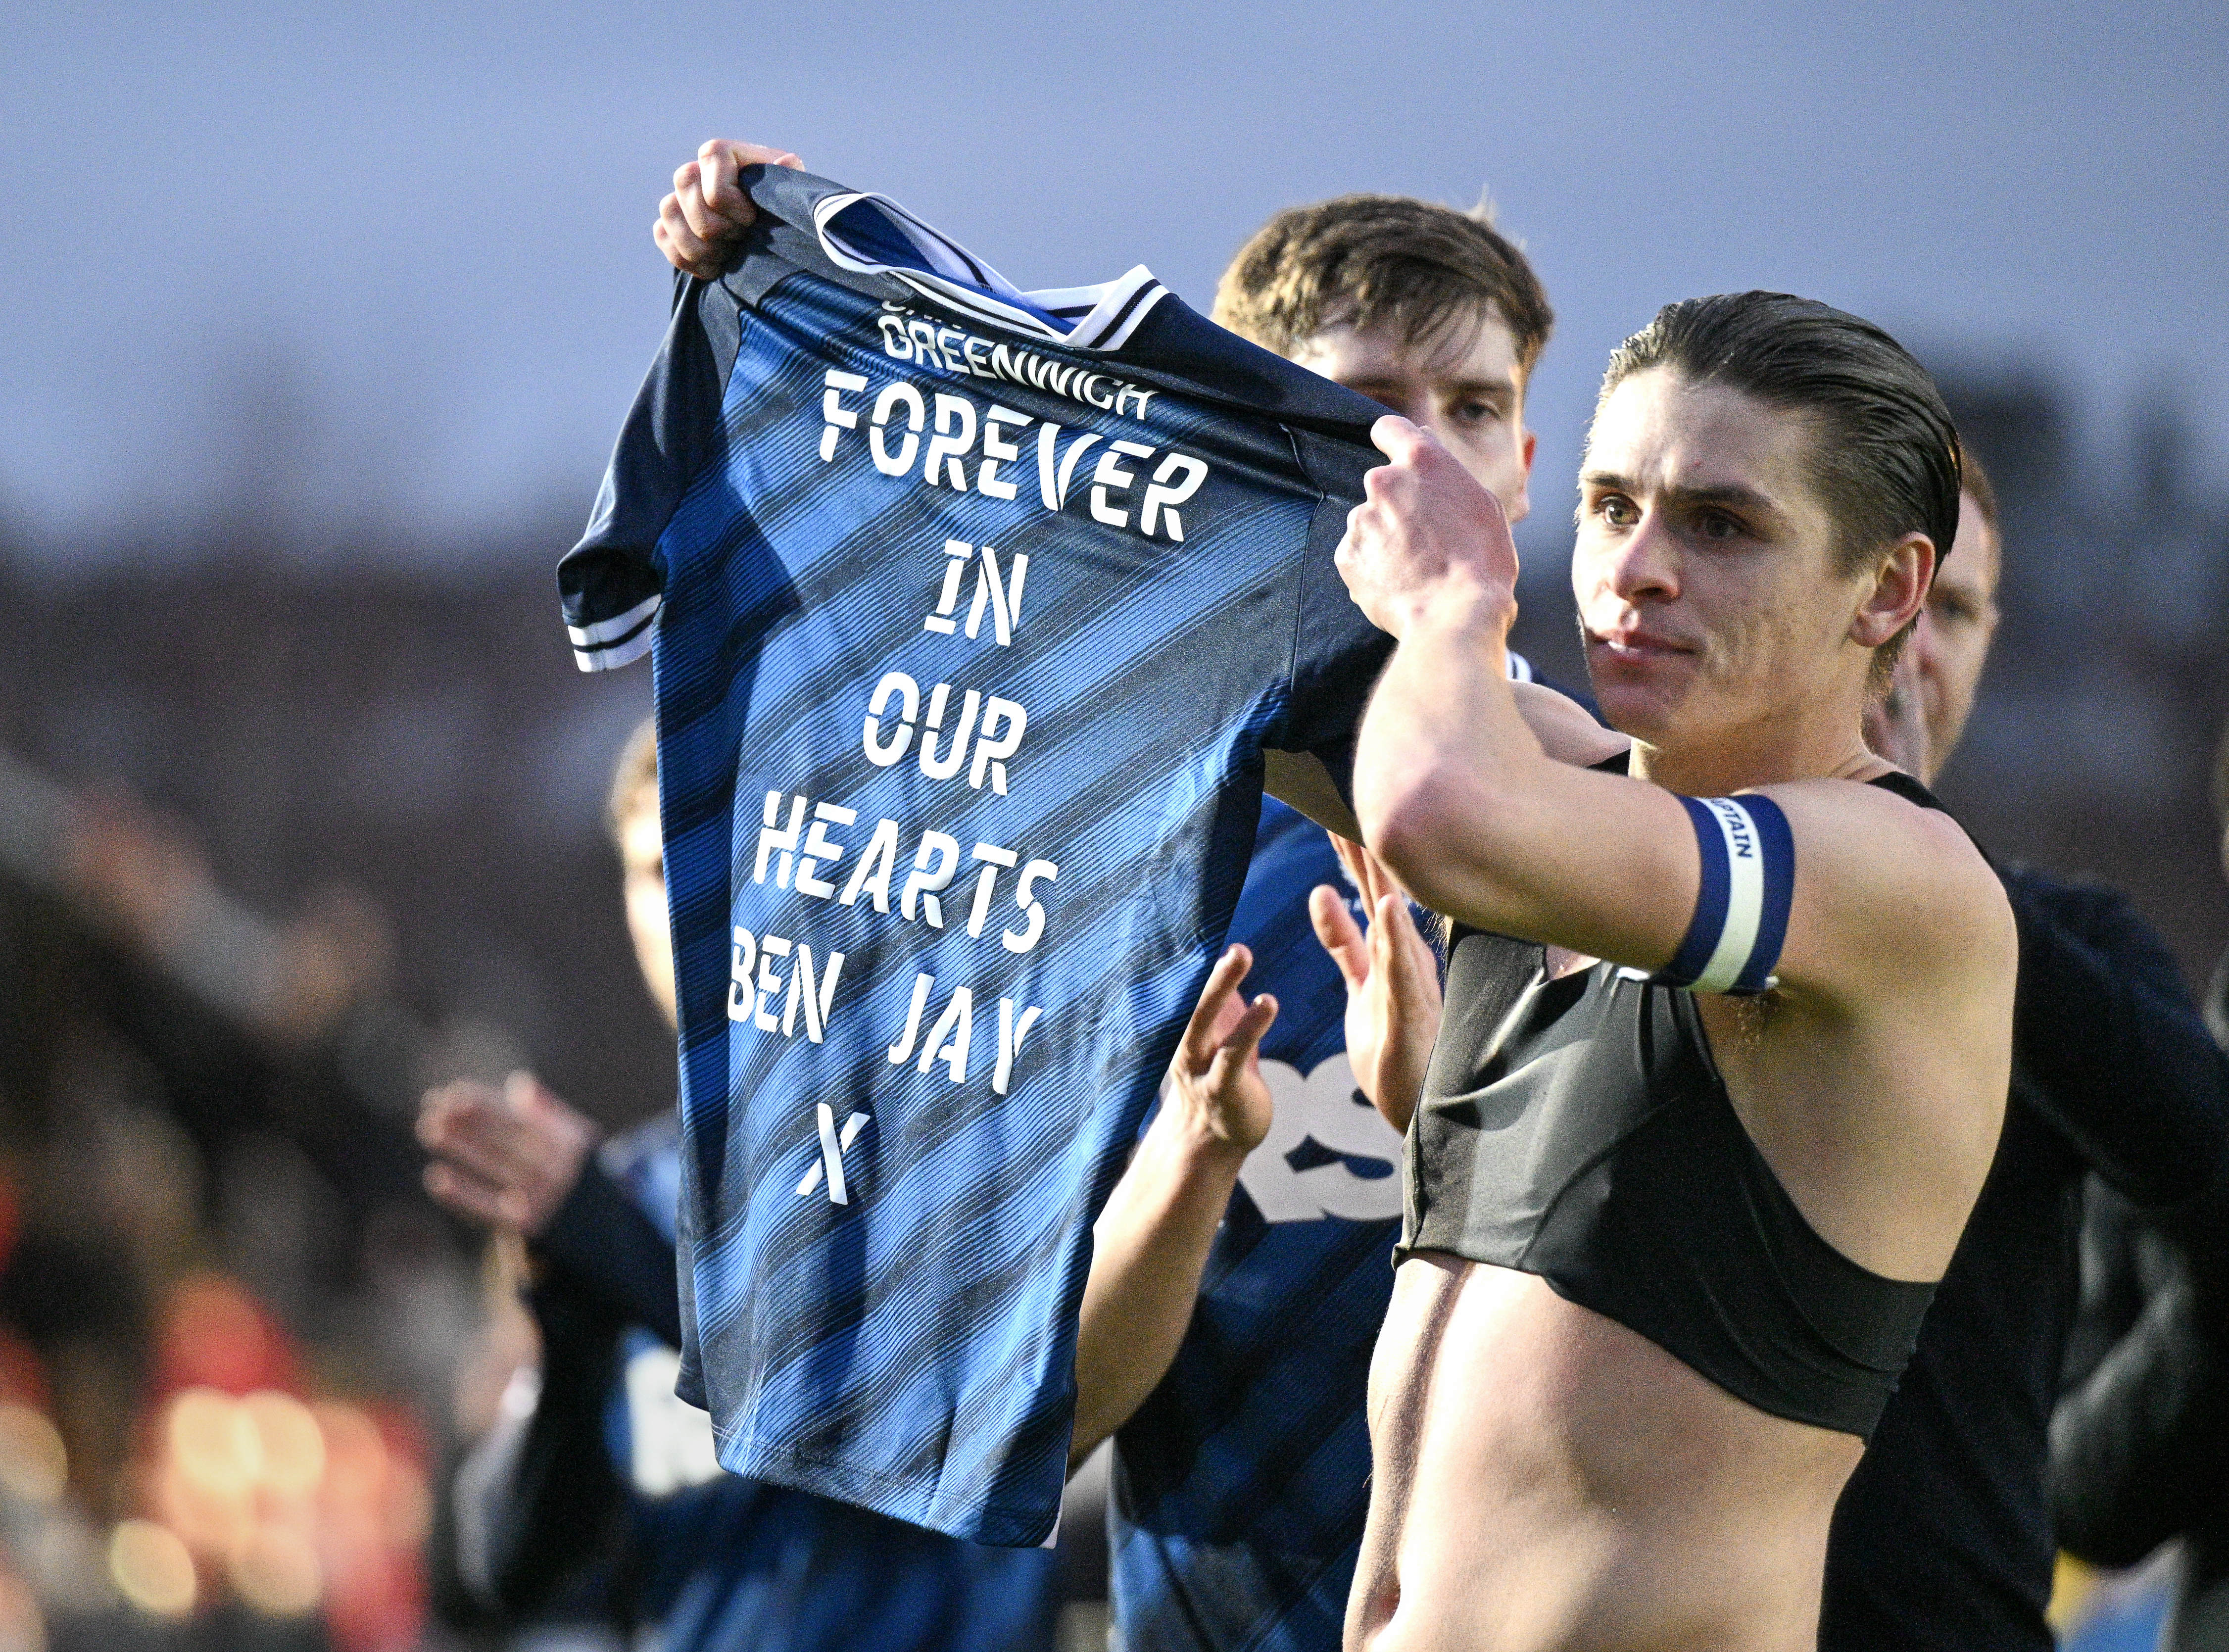 Dobson holds up shirt saying "Forever in our hearts Ben Jay x"